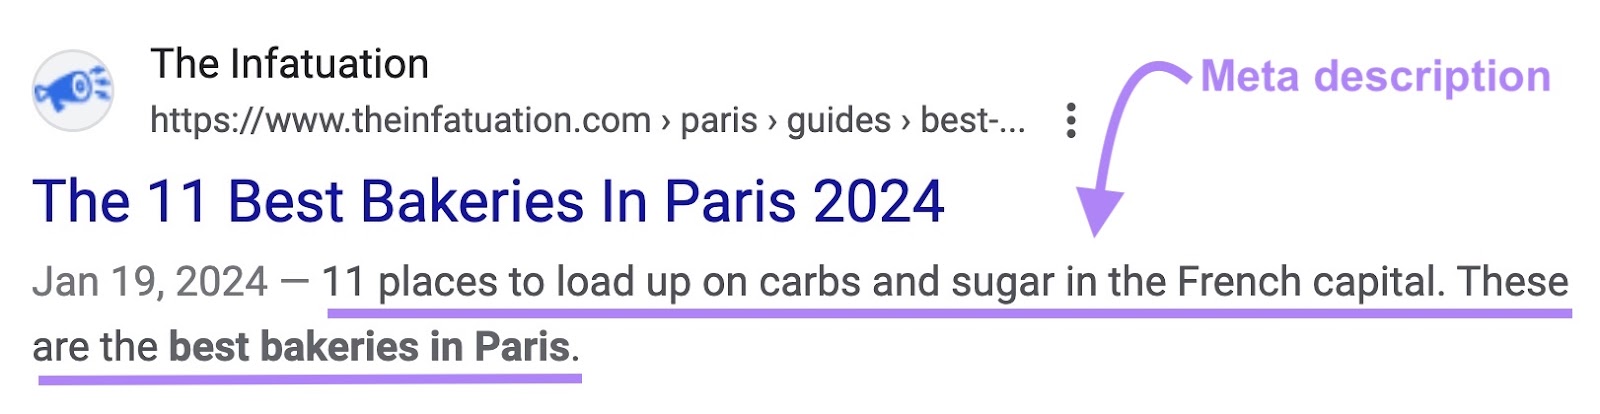  "11 places to load   up   connected  carbs and sweetener  successful  the French capital. These are the champion  bakeries successful  Paris"